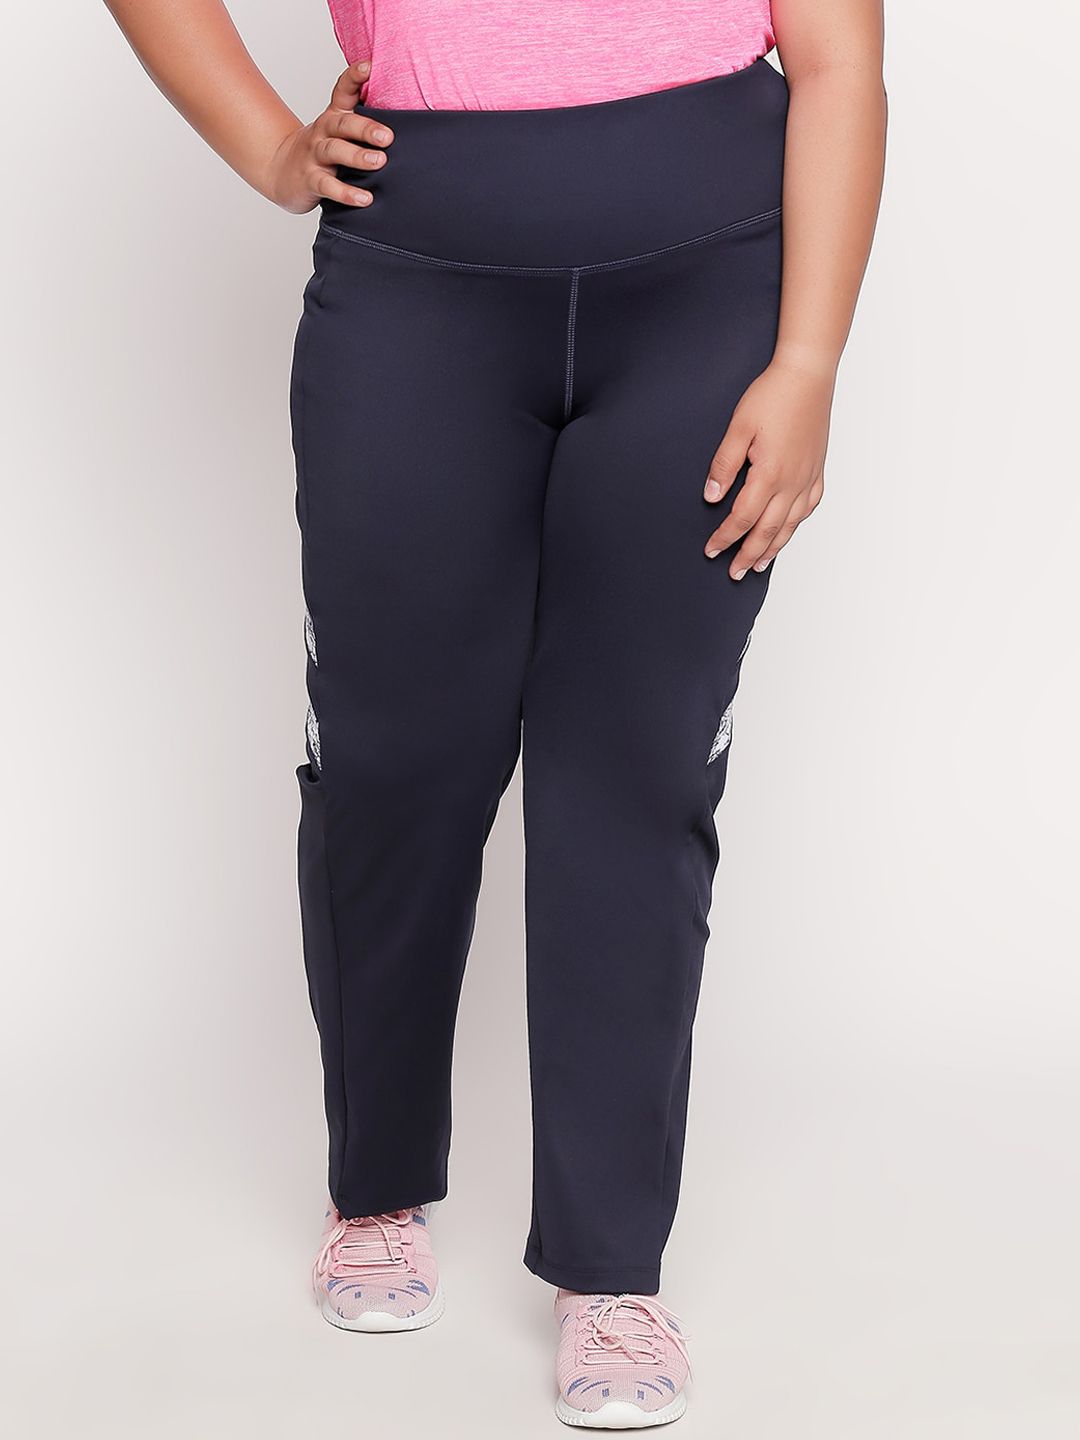 Tuna London Women Navy Blue Solid Track Pants Price in India